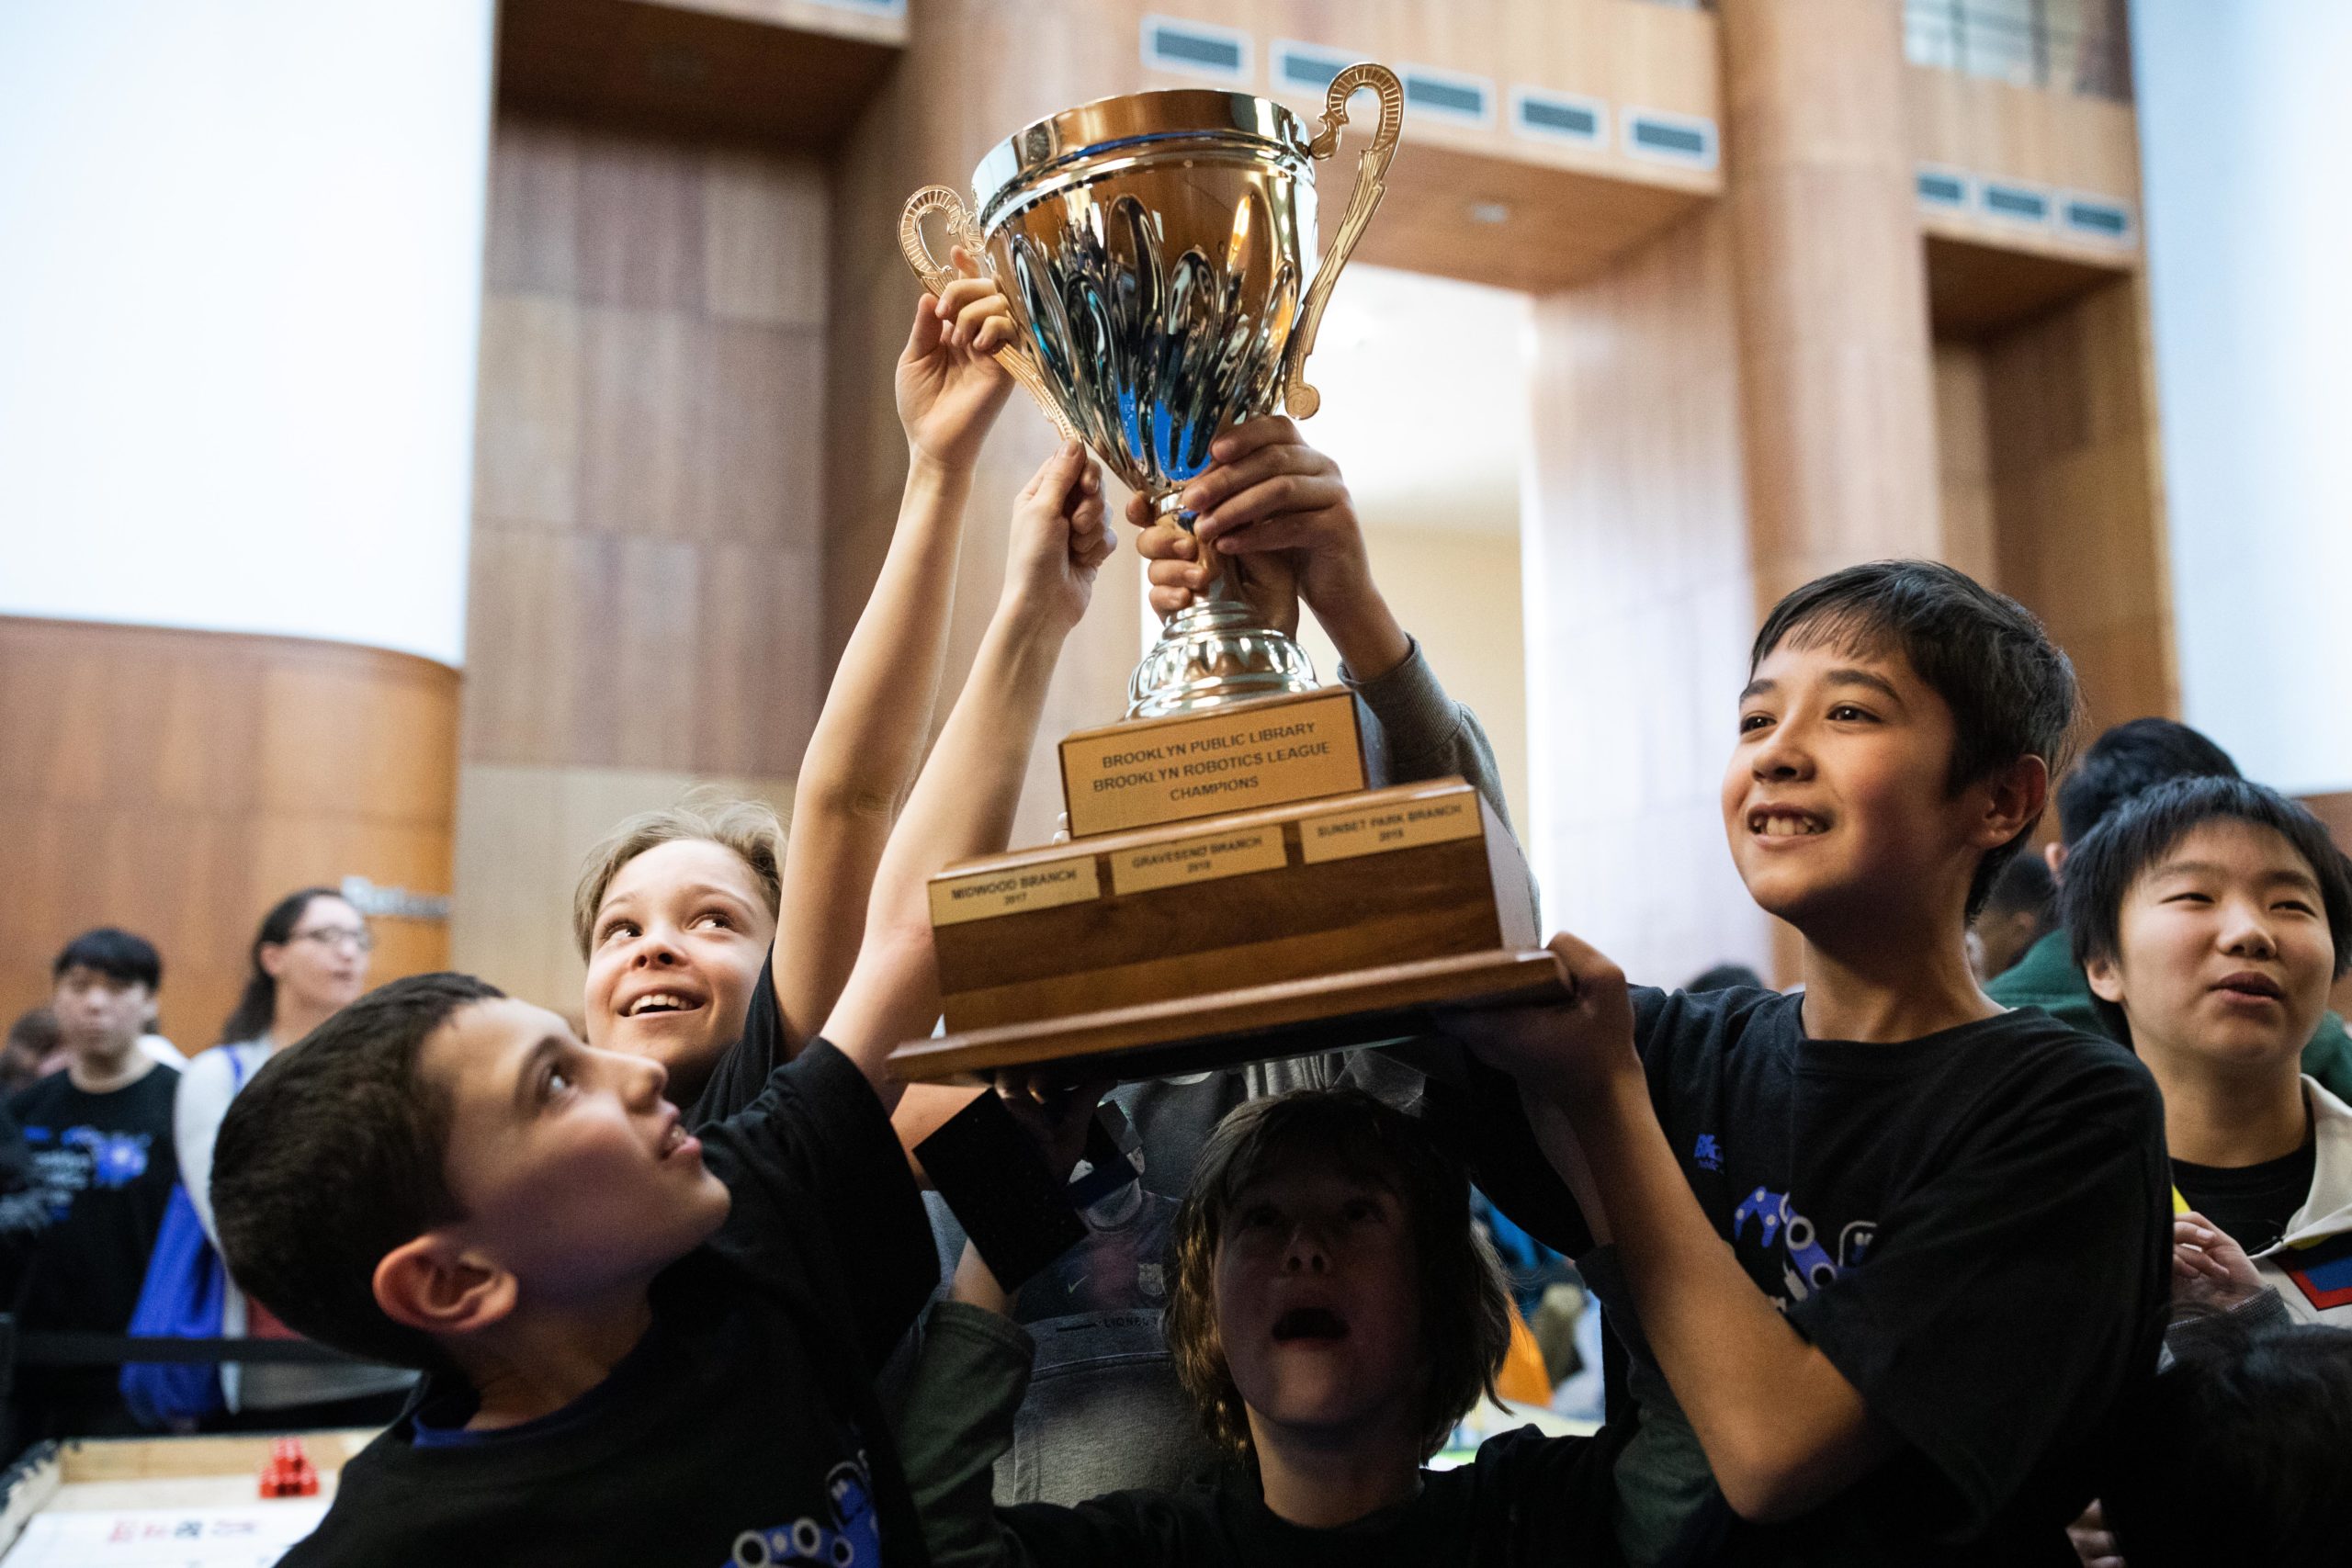 The Kings Bay team will get to display the winning trophy in their library throughout the year. Photo: Paul Frangipane/Brooklyn Eagle